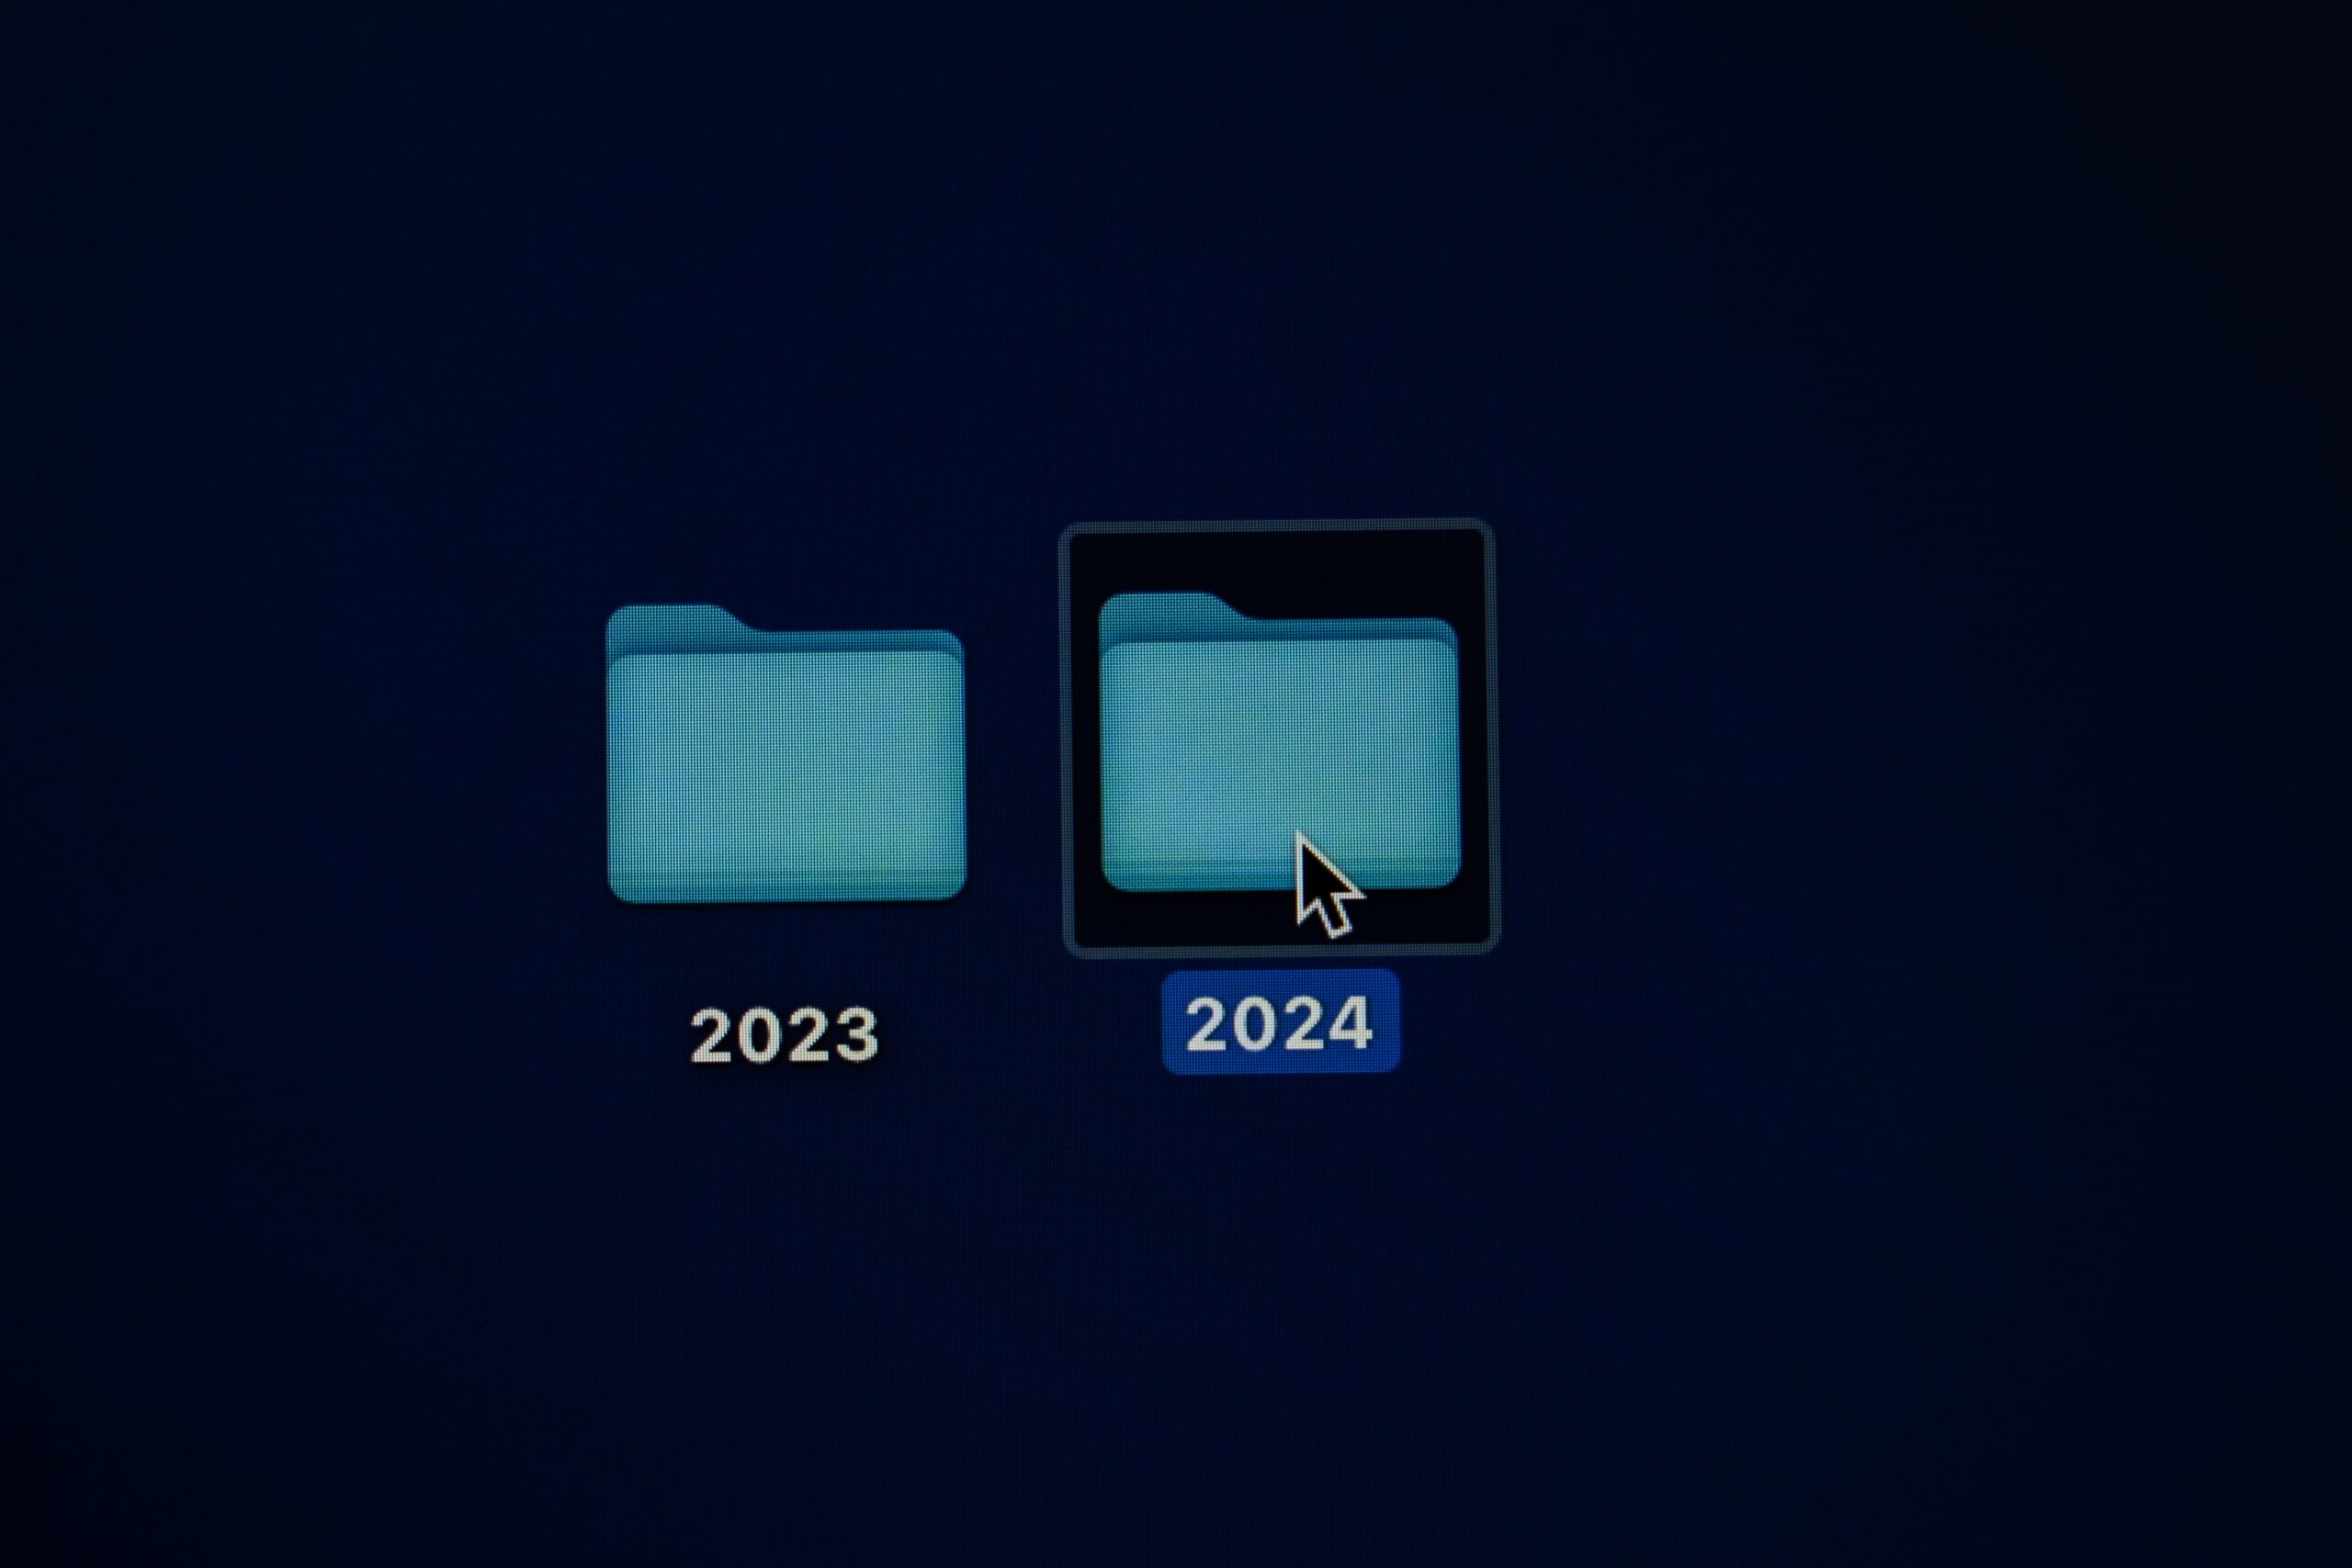 File folders for 2023 and 2024